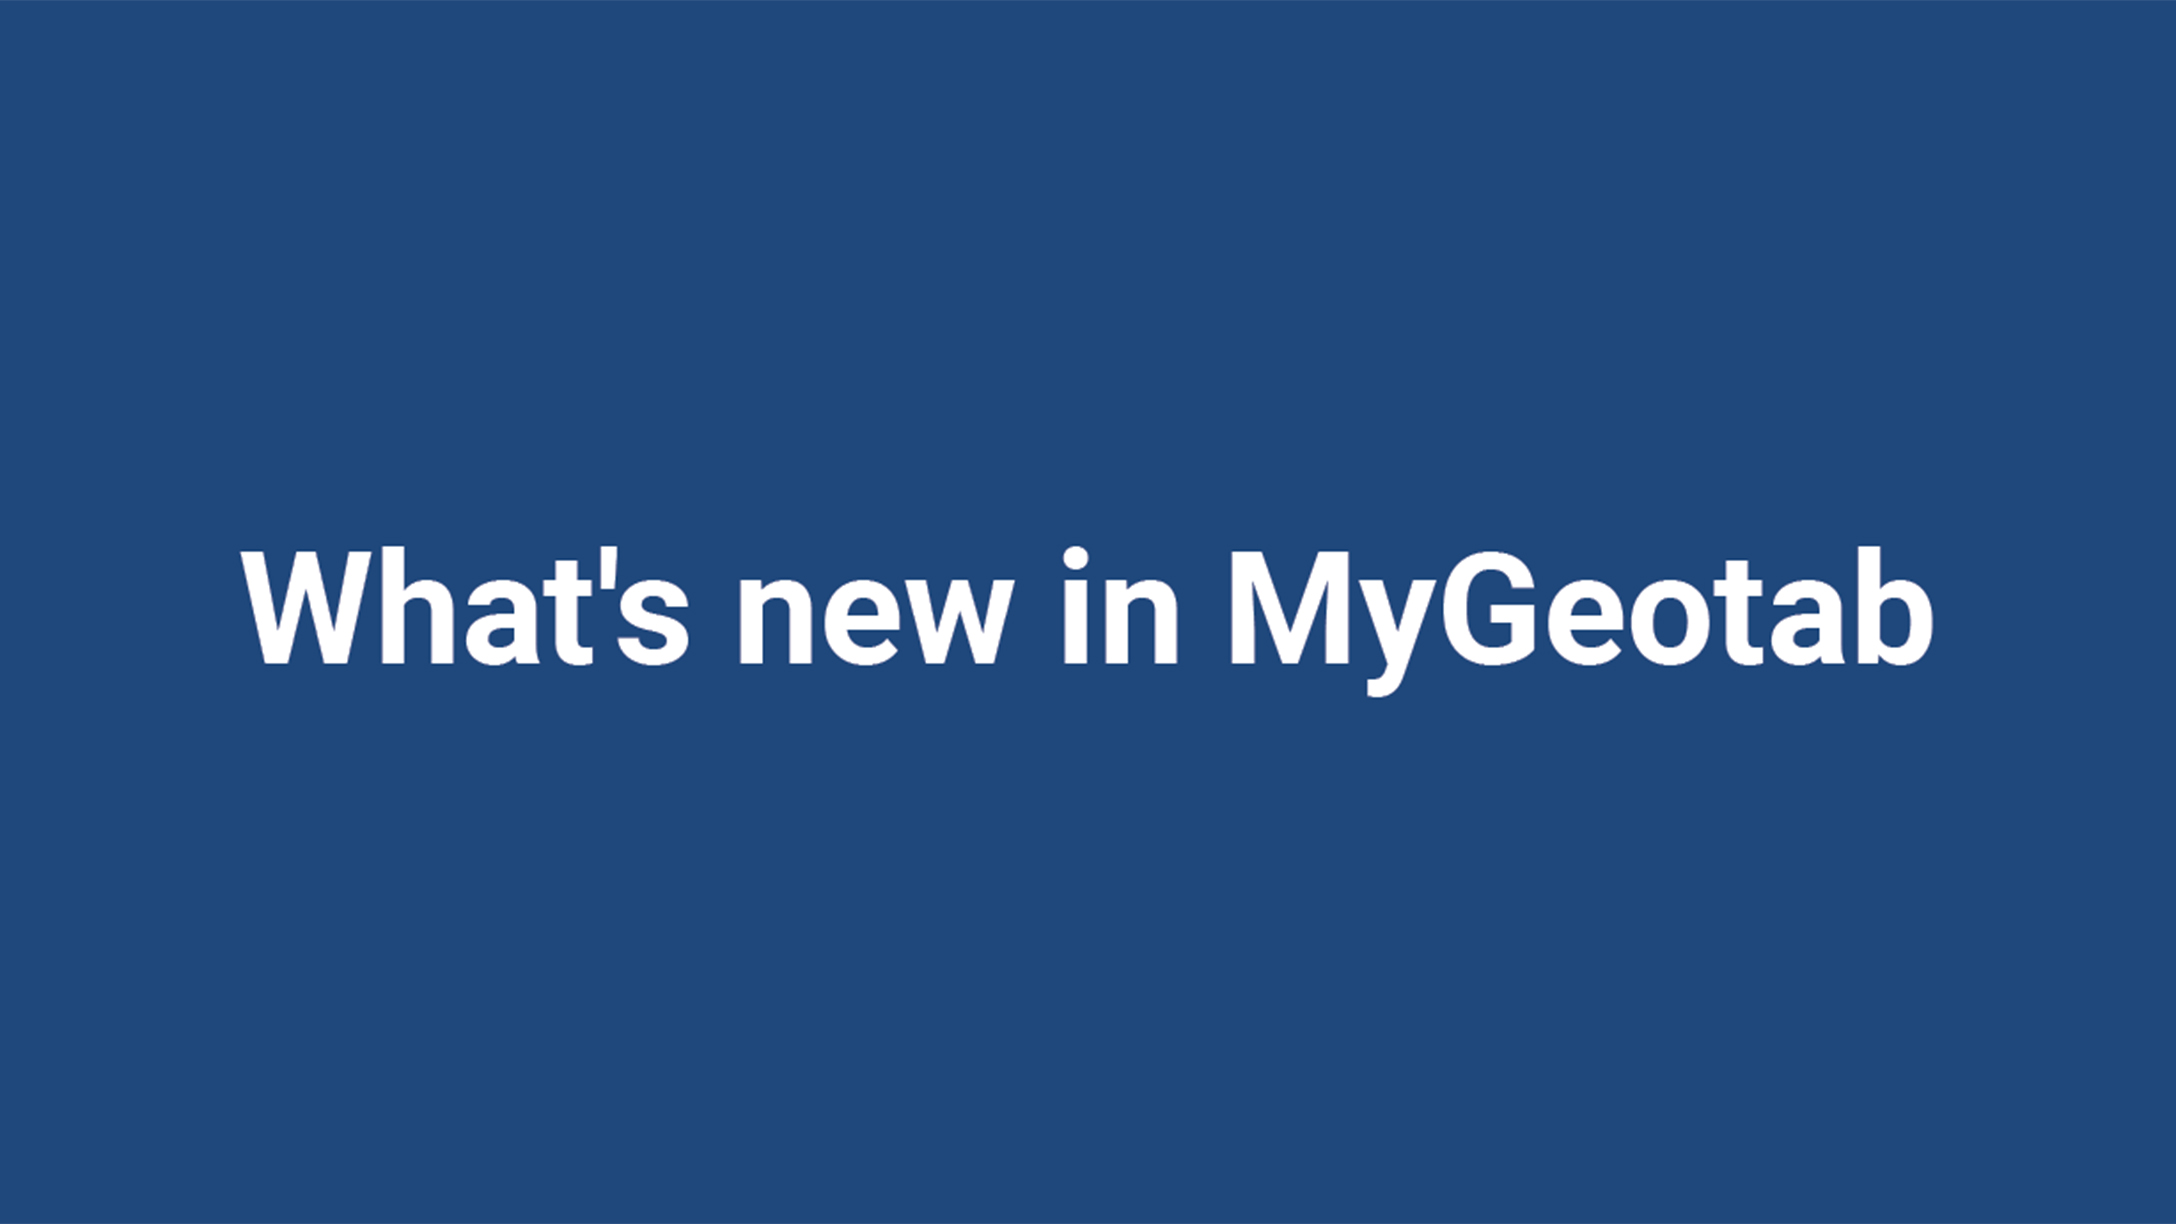 "What’s new in MyGeotab" in white writing with a dark blue background